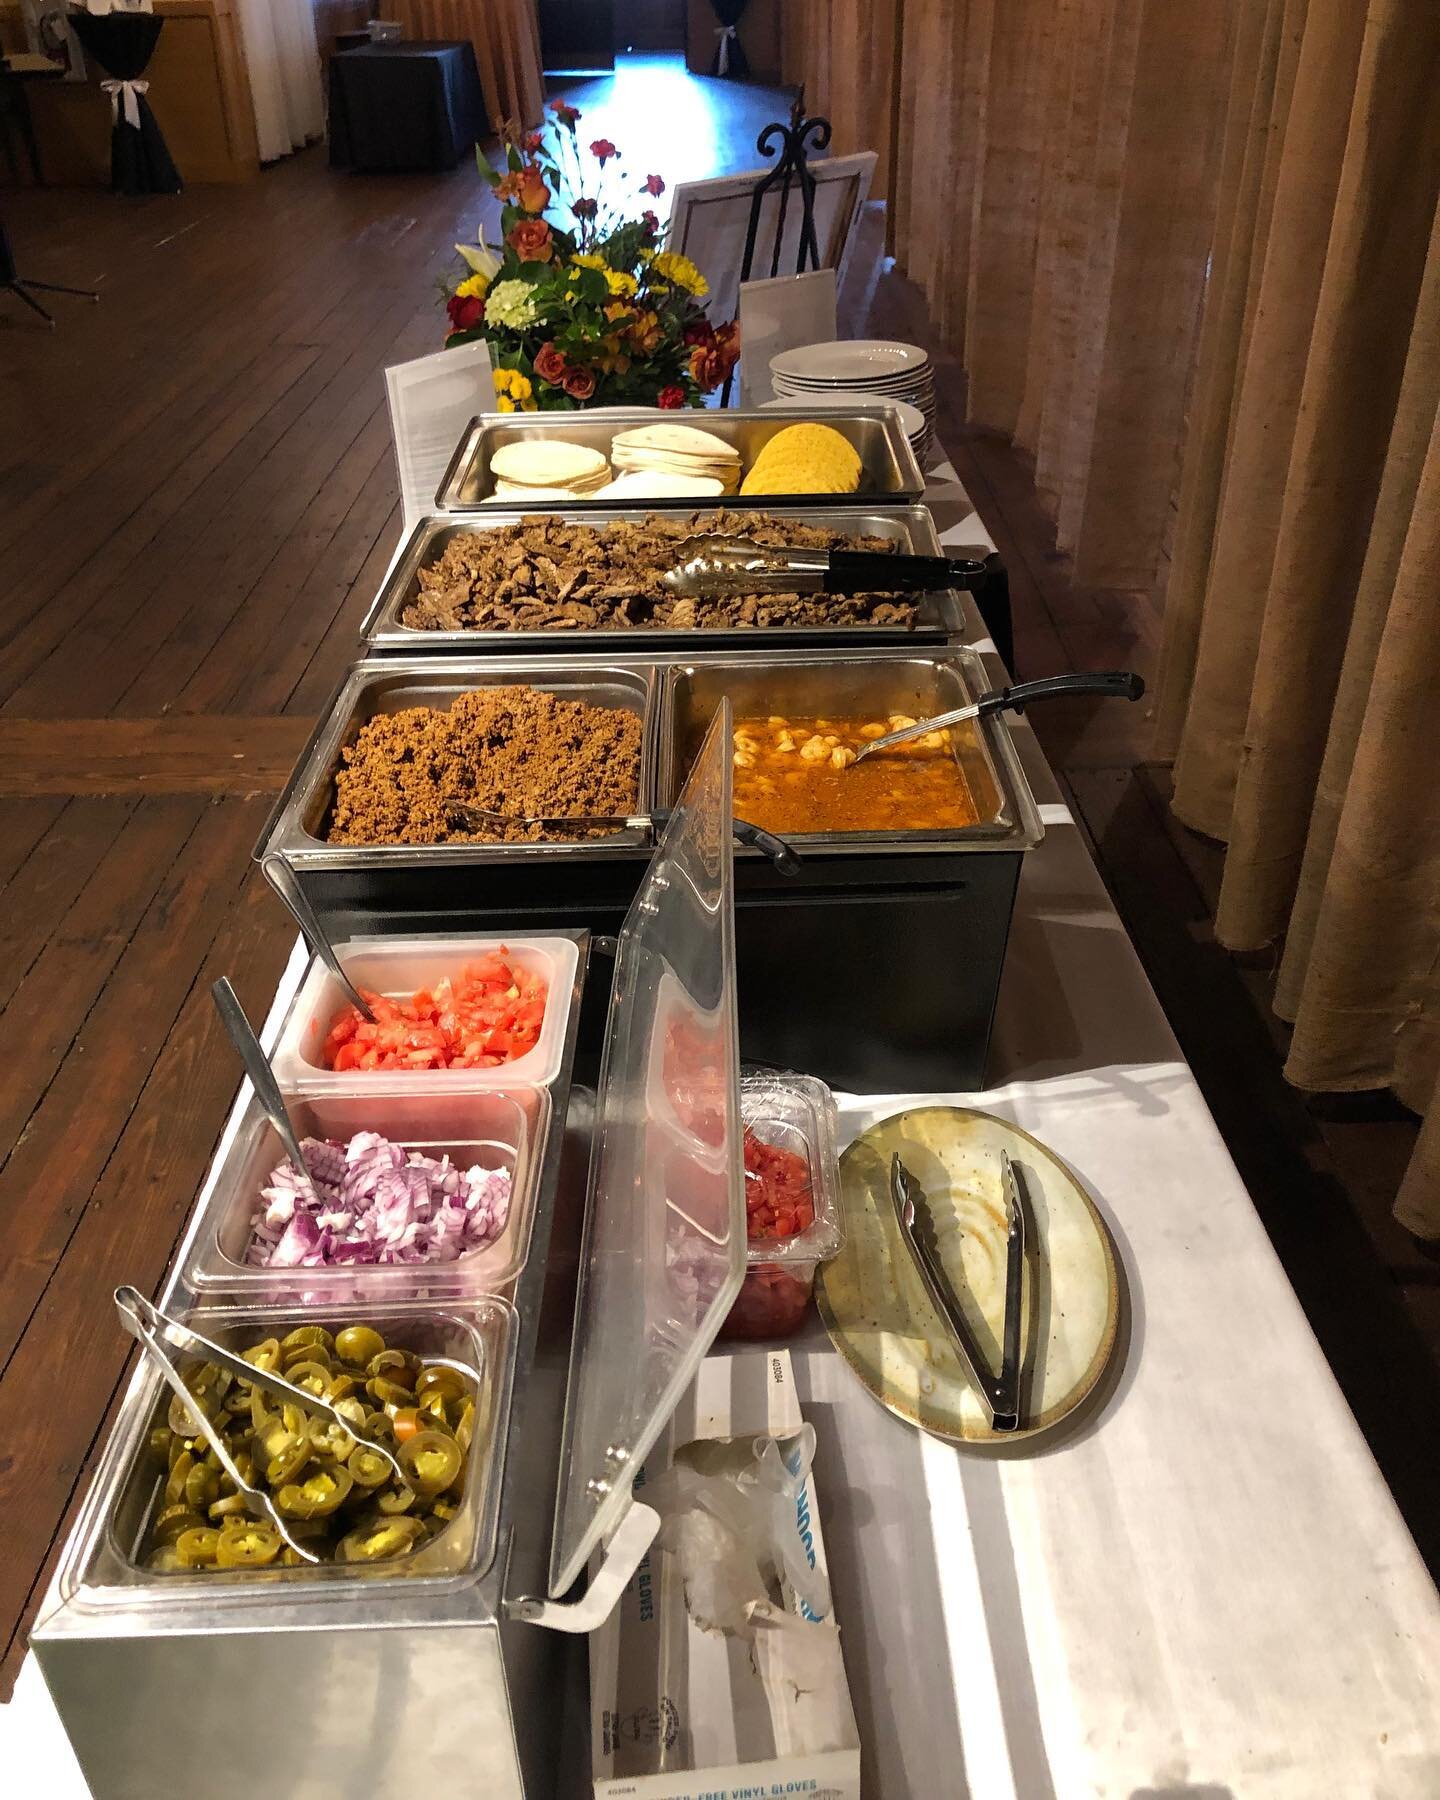 Happy #tacotuesday everyone!

Visit our website to check out the menus and buffet packages we offer. We have a wide variety to fit your palate and the tone of any event. Plus, if we don&rsquo;t have something your looking for, we can always create a 